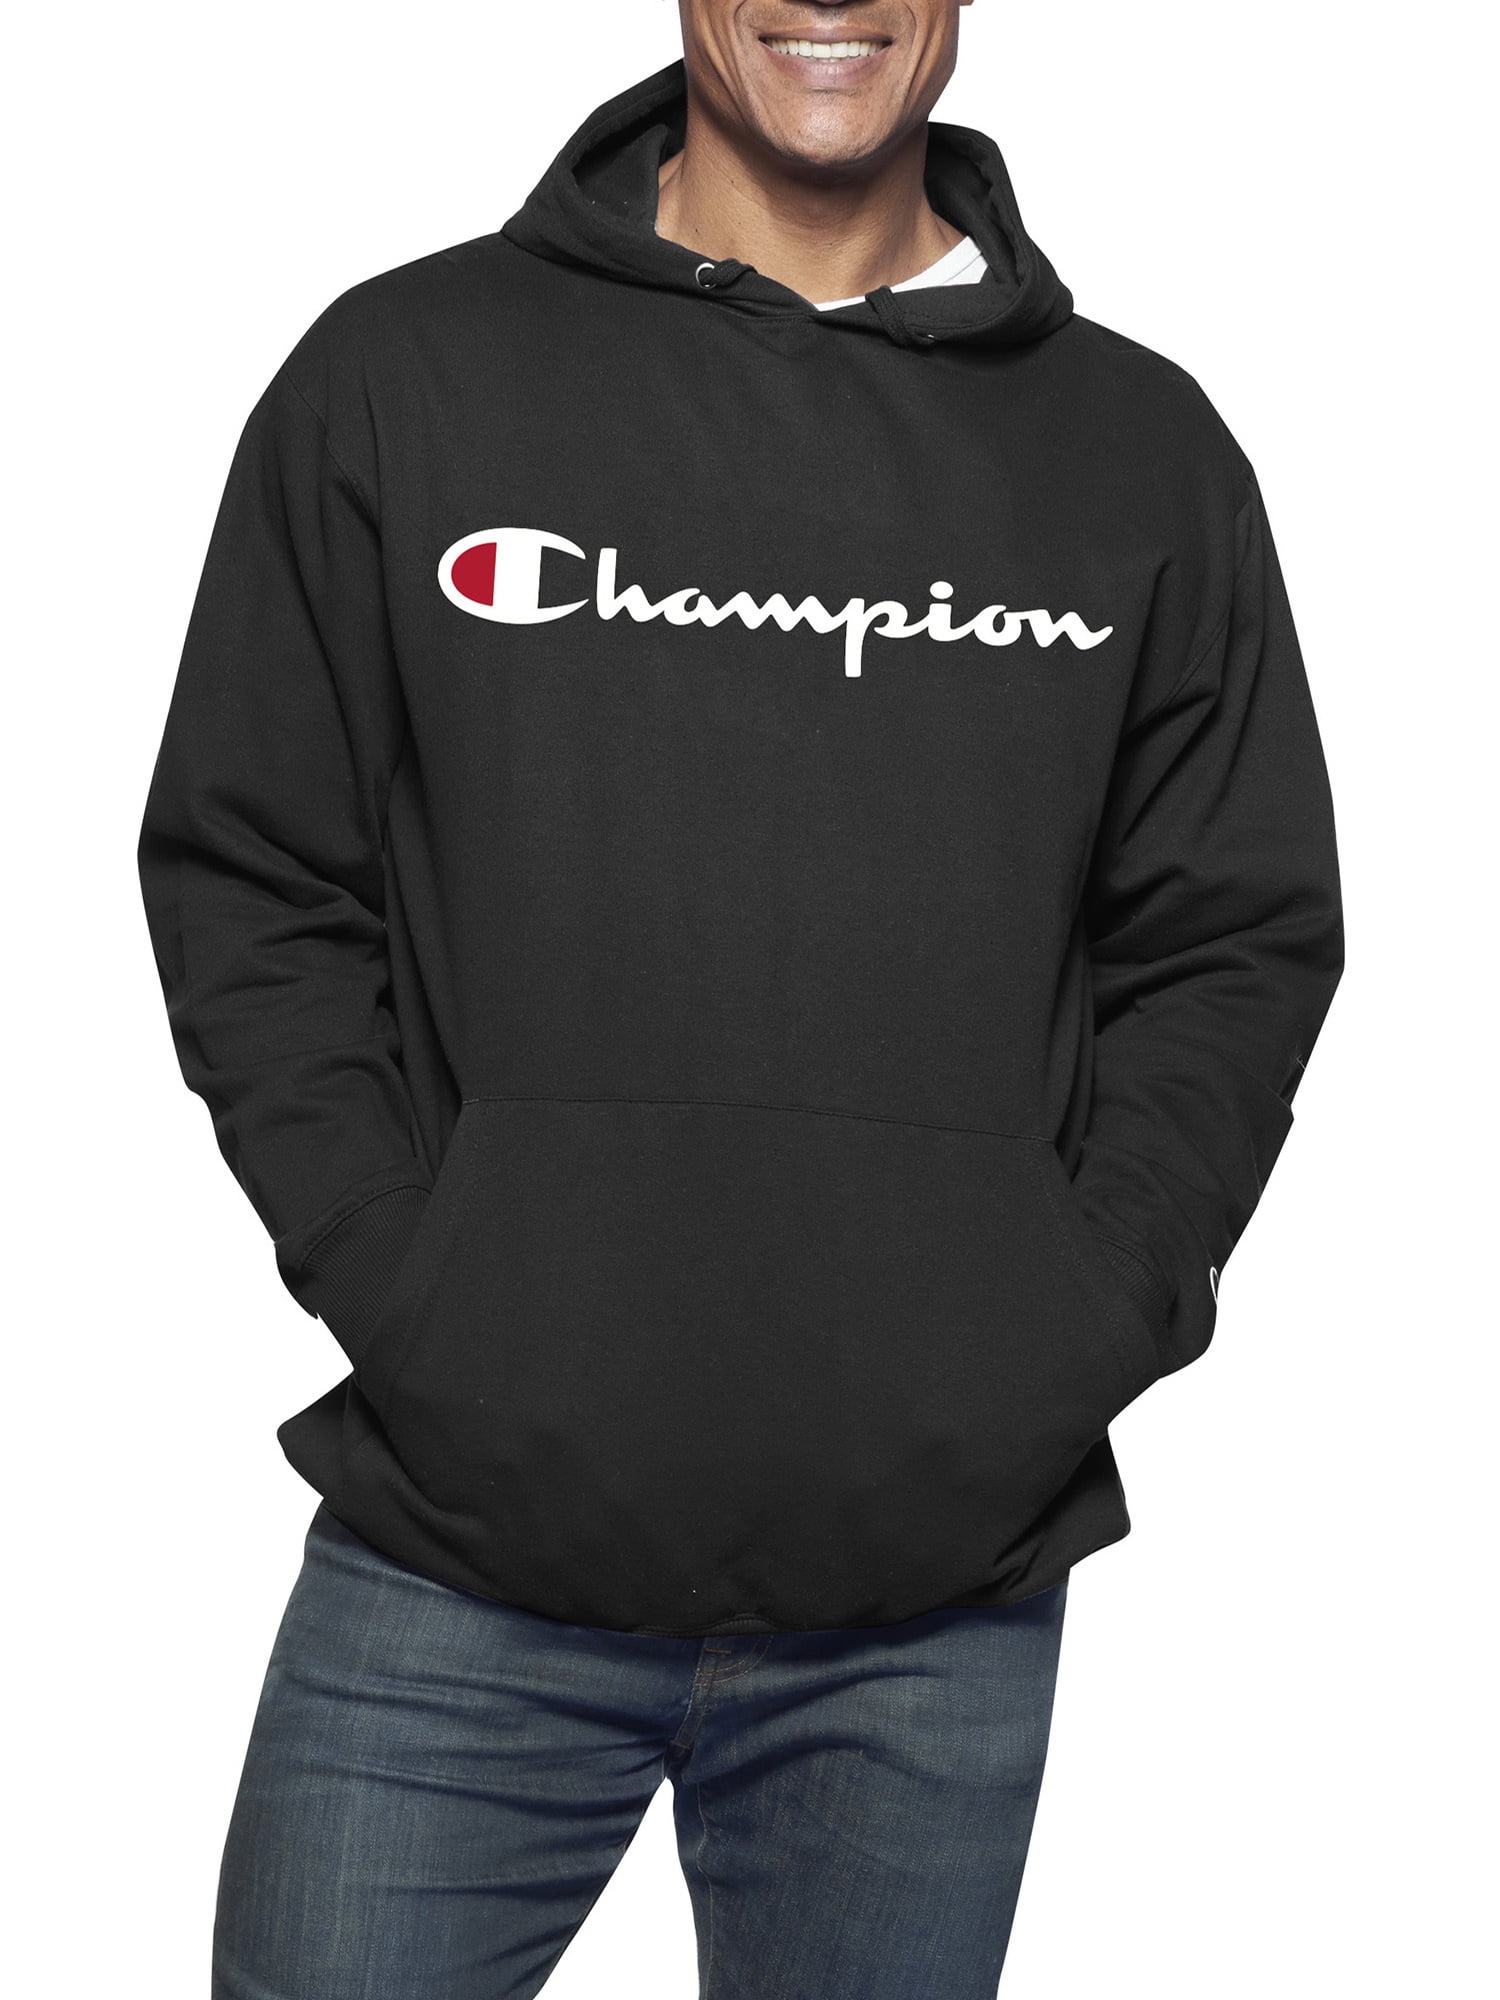 Big and Tall Shirts for Men 2 Pack Mens T-Shirt & Champion Hoodie Champion Hoodies for Men